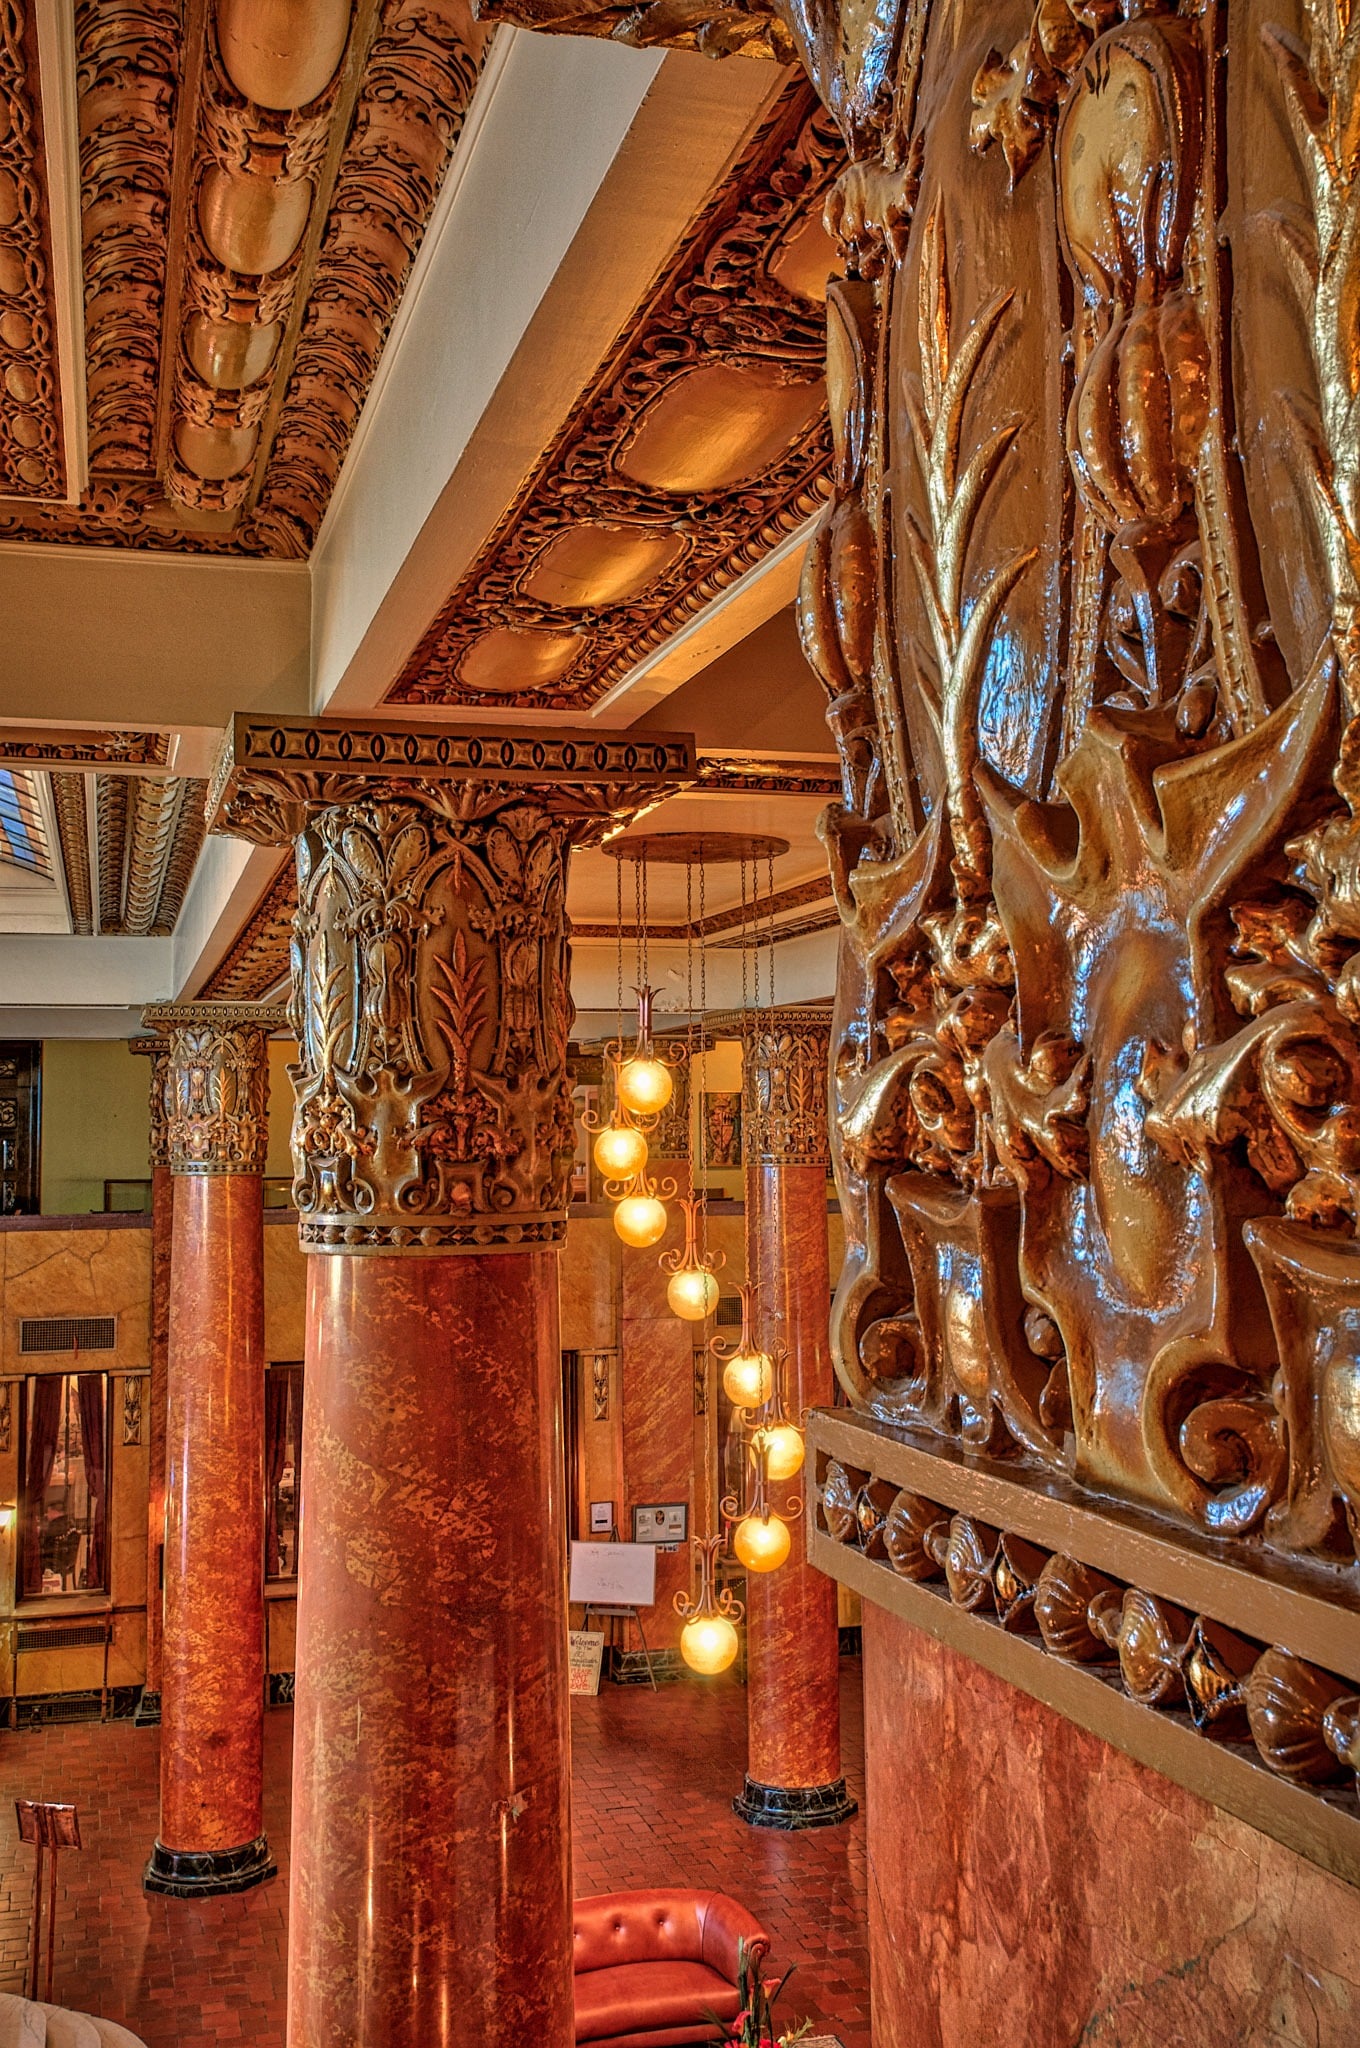 A view of the grand Hotel Gadsden lobby highlighting the leather furniture, tile floors, Italian marble, stained glass, and expansive grand staircase. Notice the spiral central chandelier.